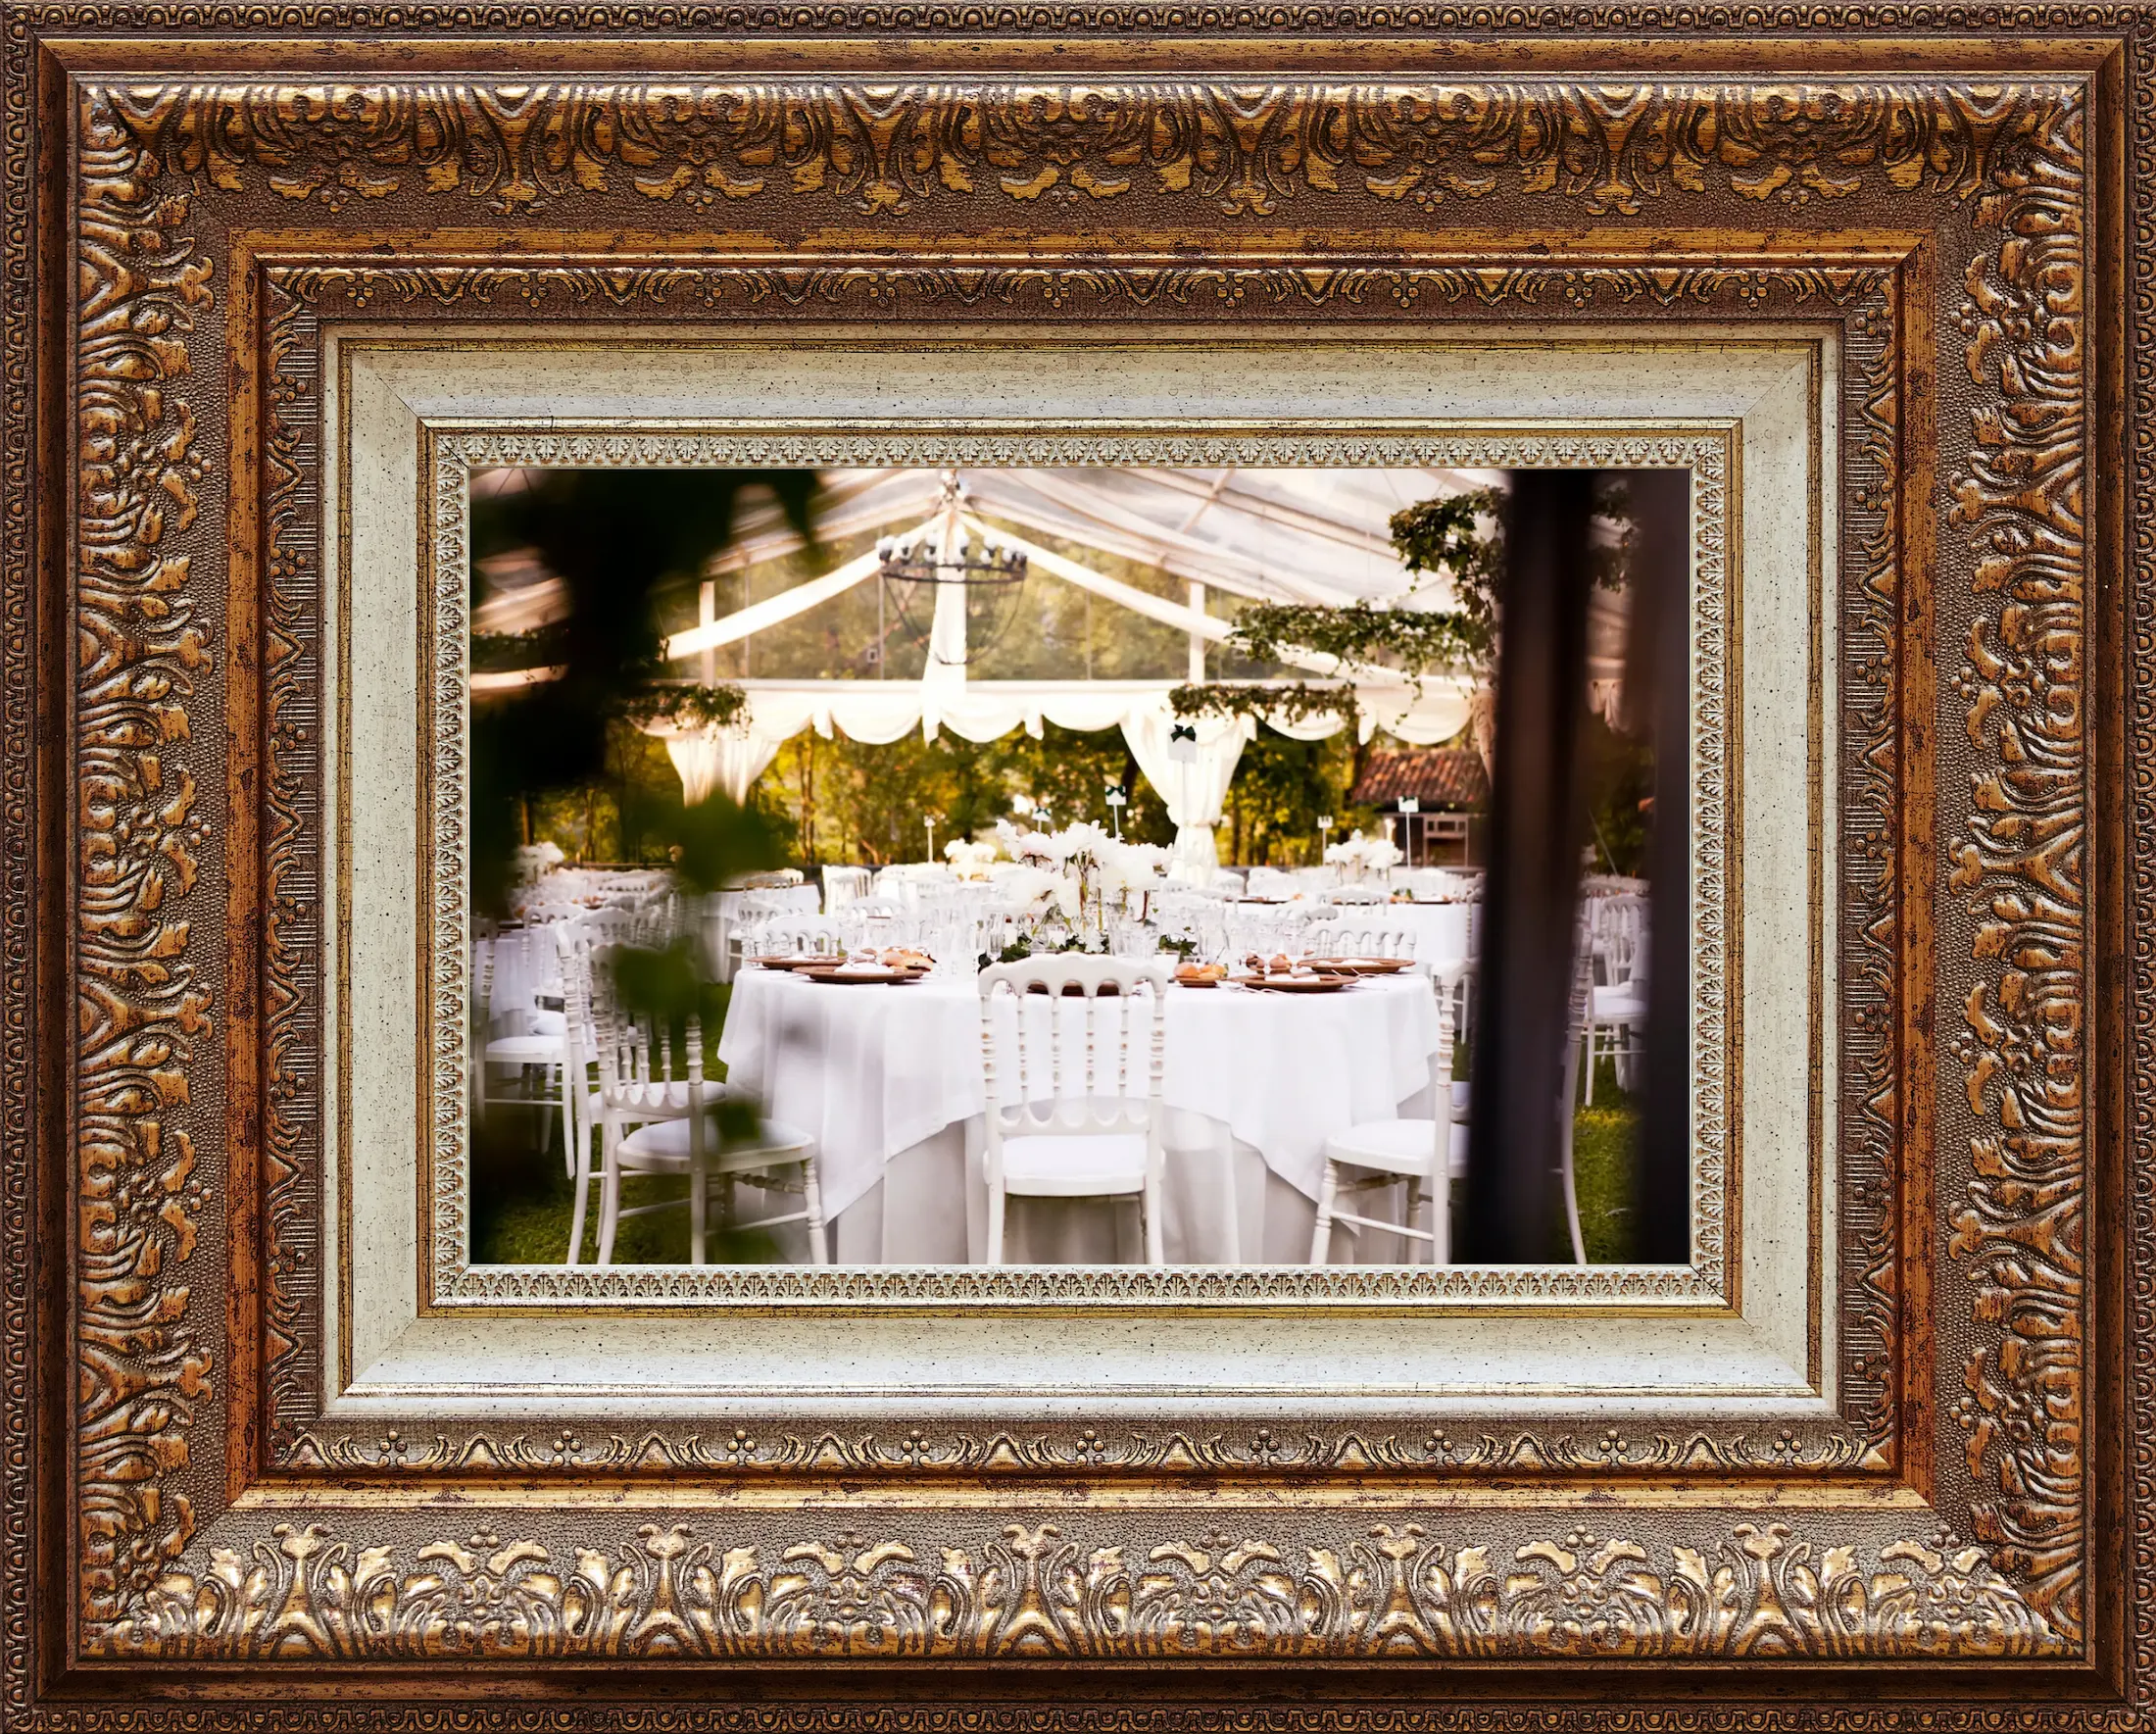 Image of decorated chairs and tables in a marquee